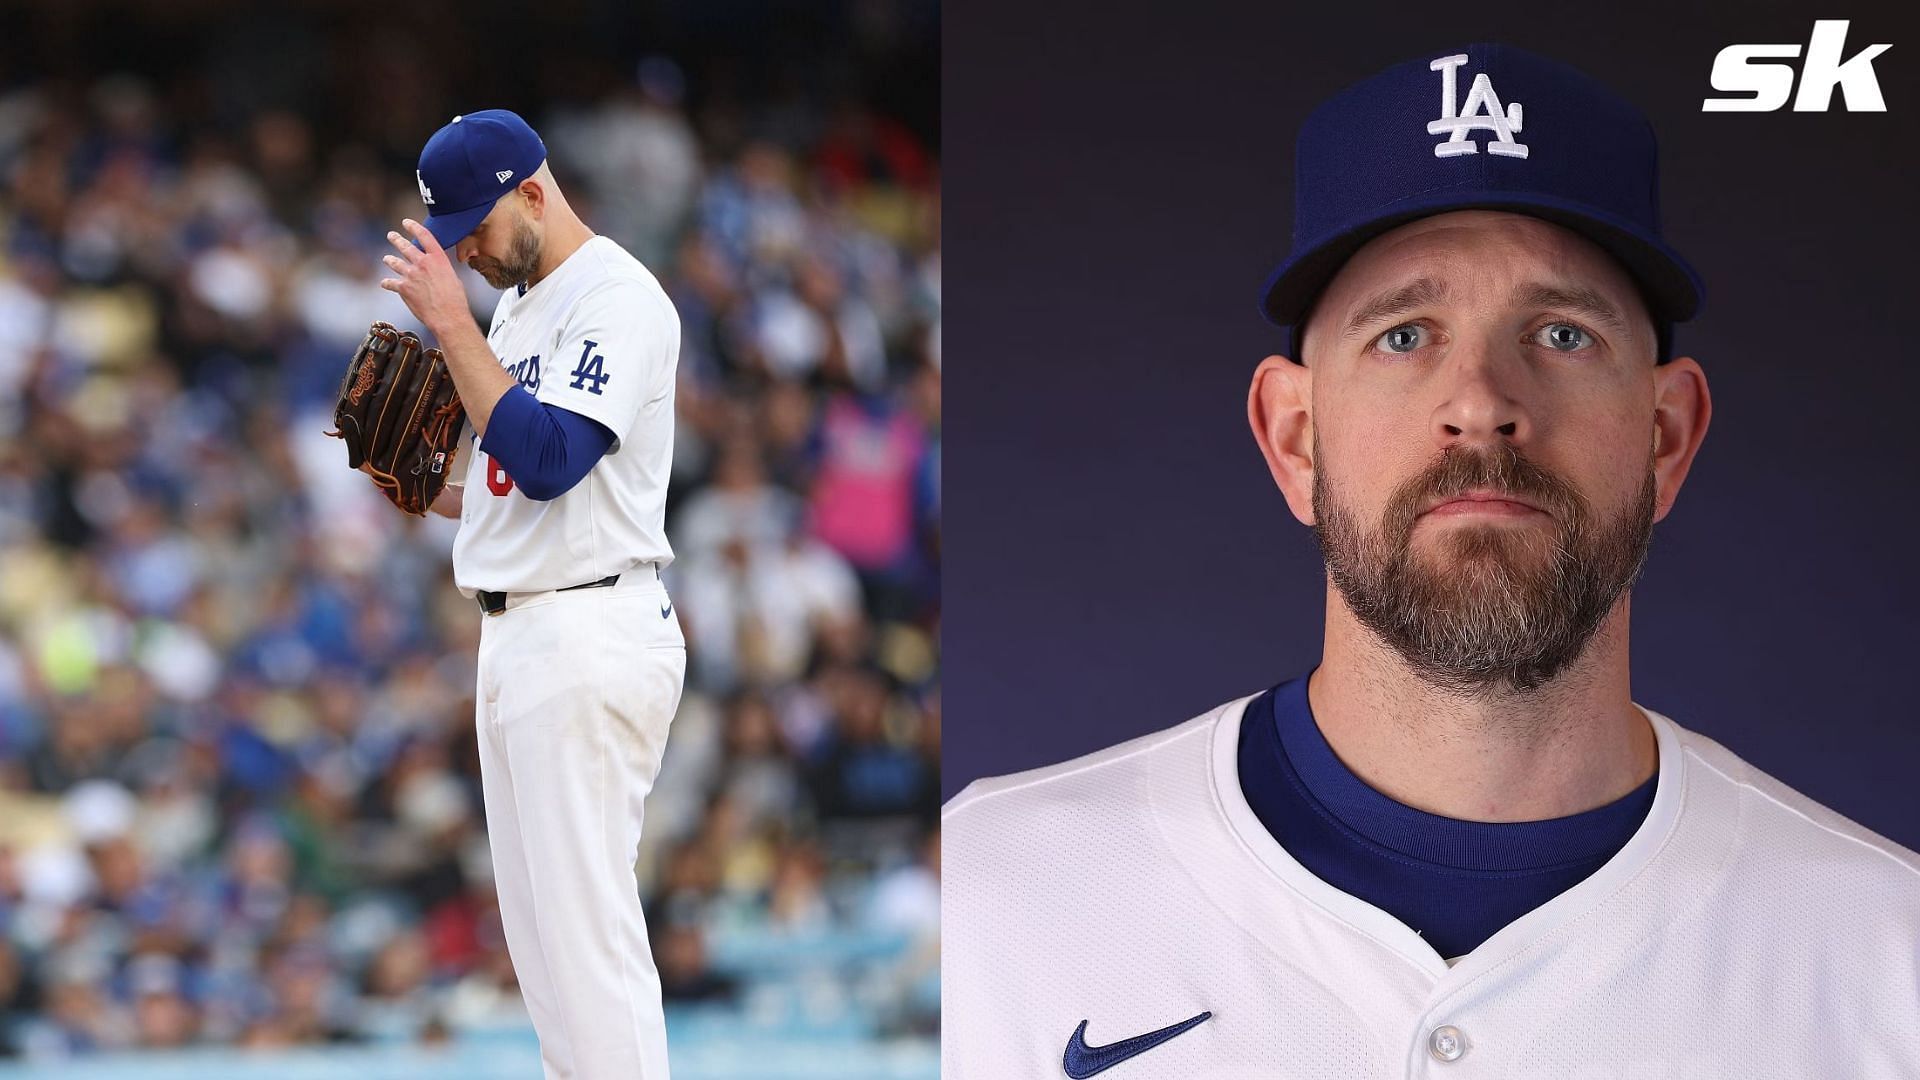 MLB analyst Alanna Rizzo took aim at the Dodgers after pitching staff gave up 14 walks to the Padres on Sunday